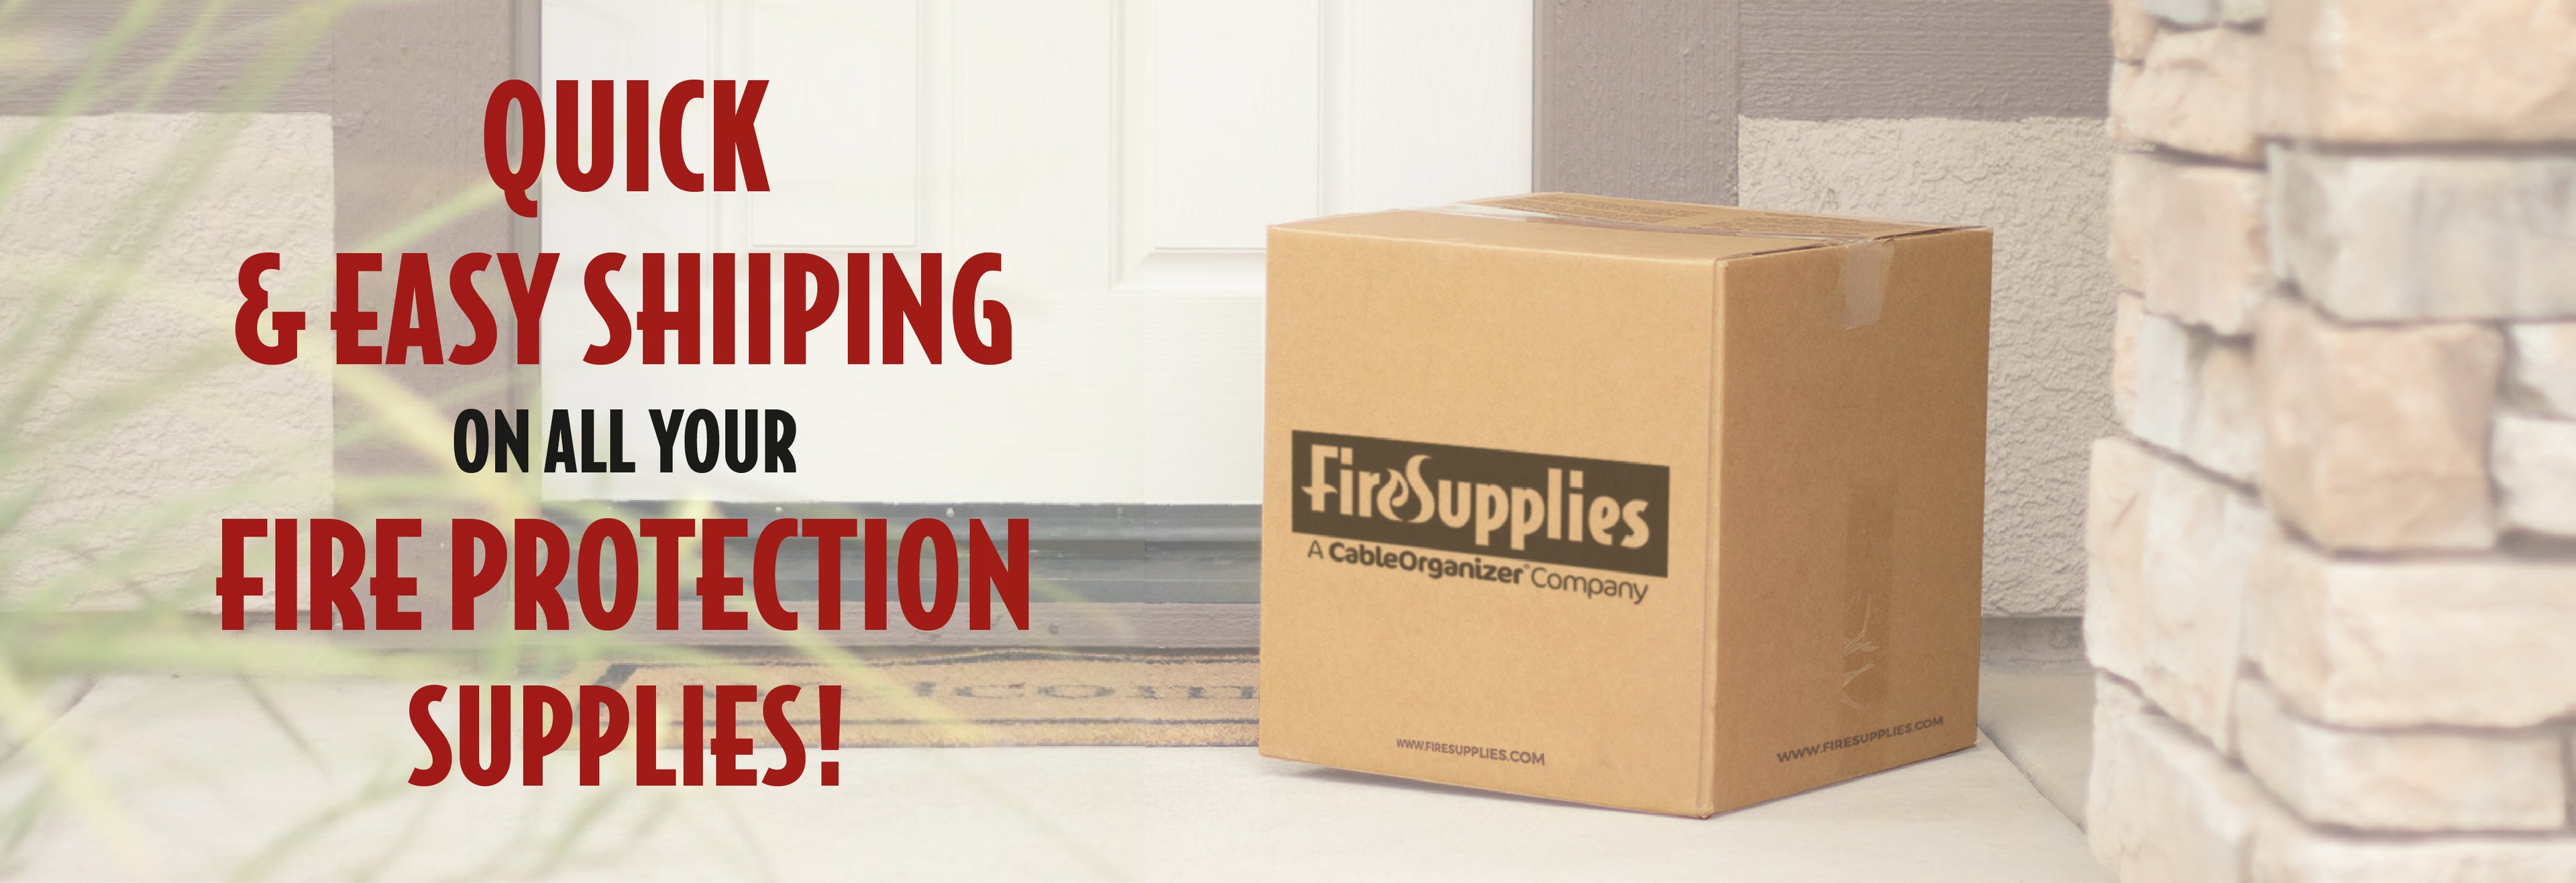 Quick & Easy Shipping on all your Fire Protection Supplies!